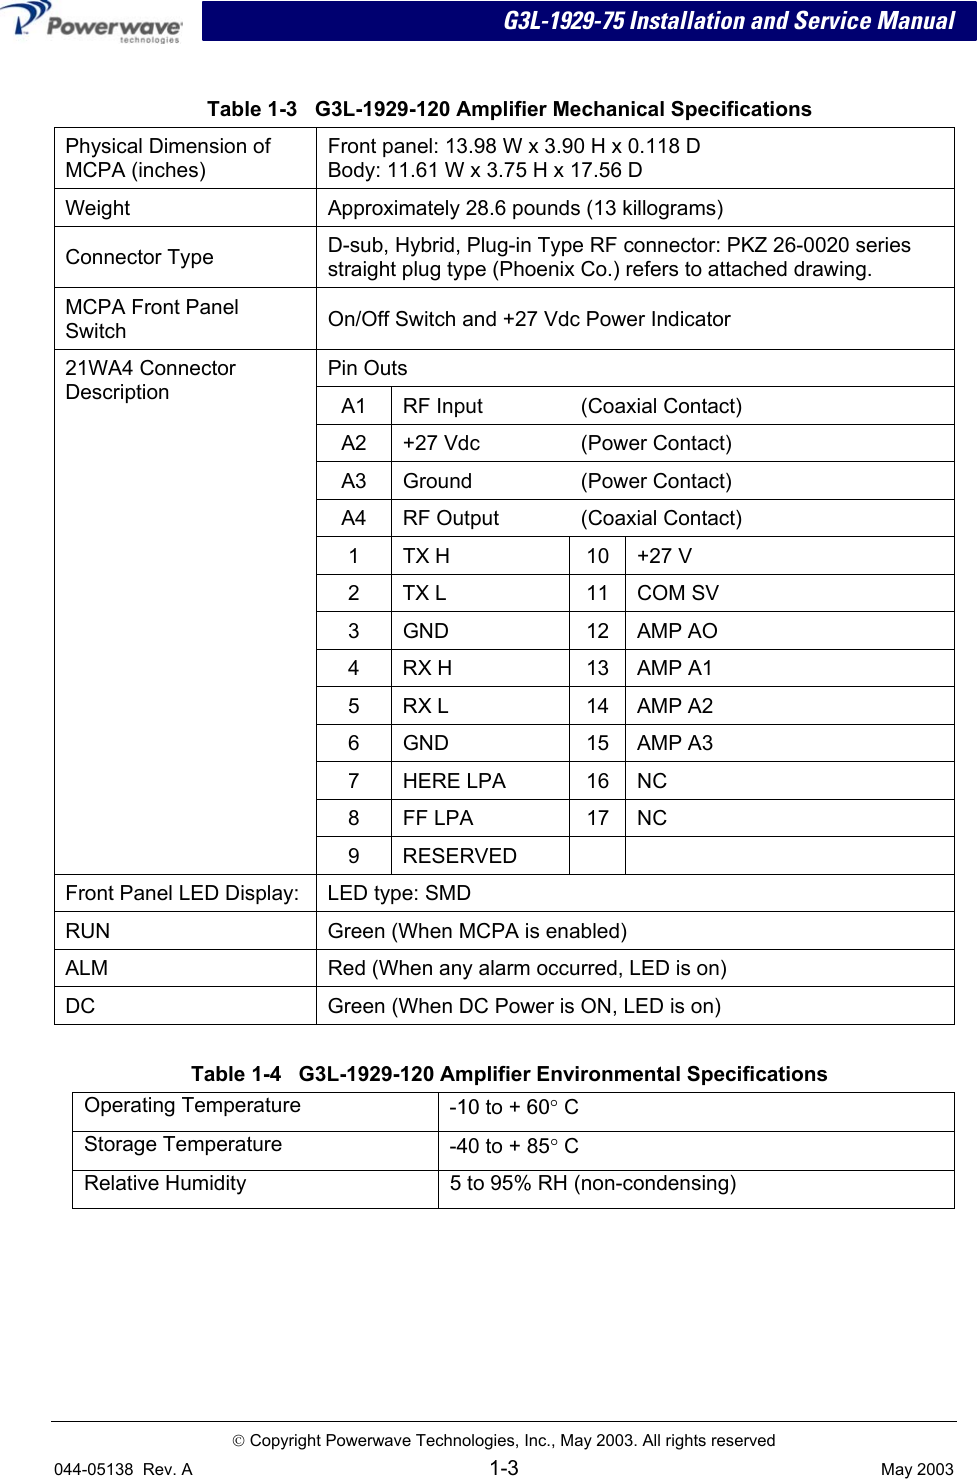 G3L-1929-75 Installation and Service Manual  Table 1-3   G3L-1929-120 Amplifier Mechanical Specifications Physical Dimension of MCPA (inches) Front panel: 13.98 W x 3.90 H x 0.118 D  Body: 11.61 W x 3.75 H x 17.56 D  Weight  Approximately 28.6 pounds (13 killograms) Connector Type  D-sub, Hybrid, Plug-in Type RF connector: PKZ 26-0020 series straight plug type (Phoenix Co.) refers to attached drawing. MCPA Front Panel Switch  On/Off Switch and +27 Vdc Power Indicator Pin Outs A1  RF Input  (Coaxial Contact) A2  +27 Vdc  (Power Contact) A3 Ground  (Power Contact) A4  RF Output  (Coaxial Contact) 1  TX H  10  +27 V 2  TX L  11  COM SV 3 GND  12 AMP AO 4  RX H  13  AMP A1 5  RX L  14  AMP A2 6 GND  15 AMP A3 7 HERE LPA  16 NC 8 FF LPA  17 NC 21WA4 Connector  Description 9 RESERVED     Front Panel LED Display:  LED type: SMD RUN  Green (When MCPA is enabled) ALM  Red (When any alarm occurred, LED is on) DC  Green (When DC Power is ON, LED is on)  Table 1-4   G3L-1929-120 Amplifier Environmental Specifications  Operating Temperature -10 to + 60° C Storage Temperature  -40 to + 85° C Relative Humidity 5 to 95% RH (non-condensing)        Copyright Powerwave Technologies, Inc., May 2003. All rights reserved 044-05138  Rev. A 1-3  May 2003   